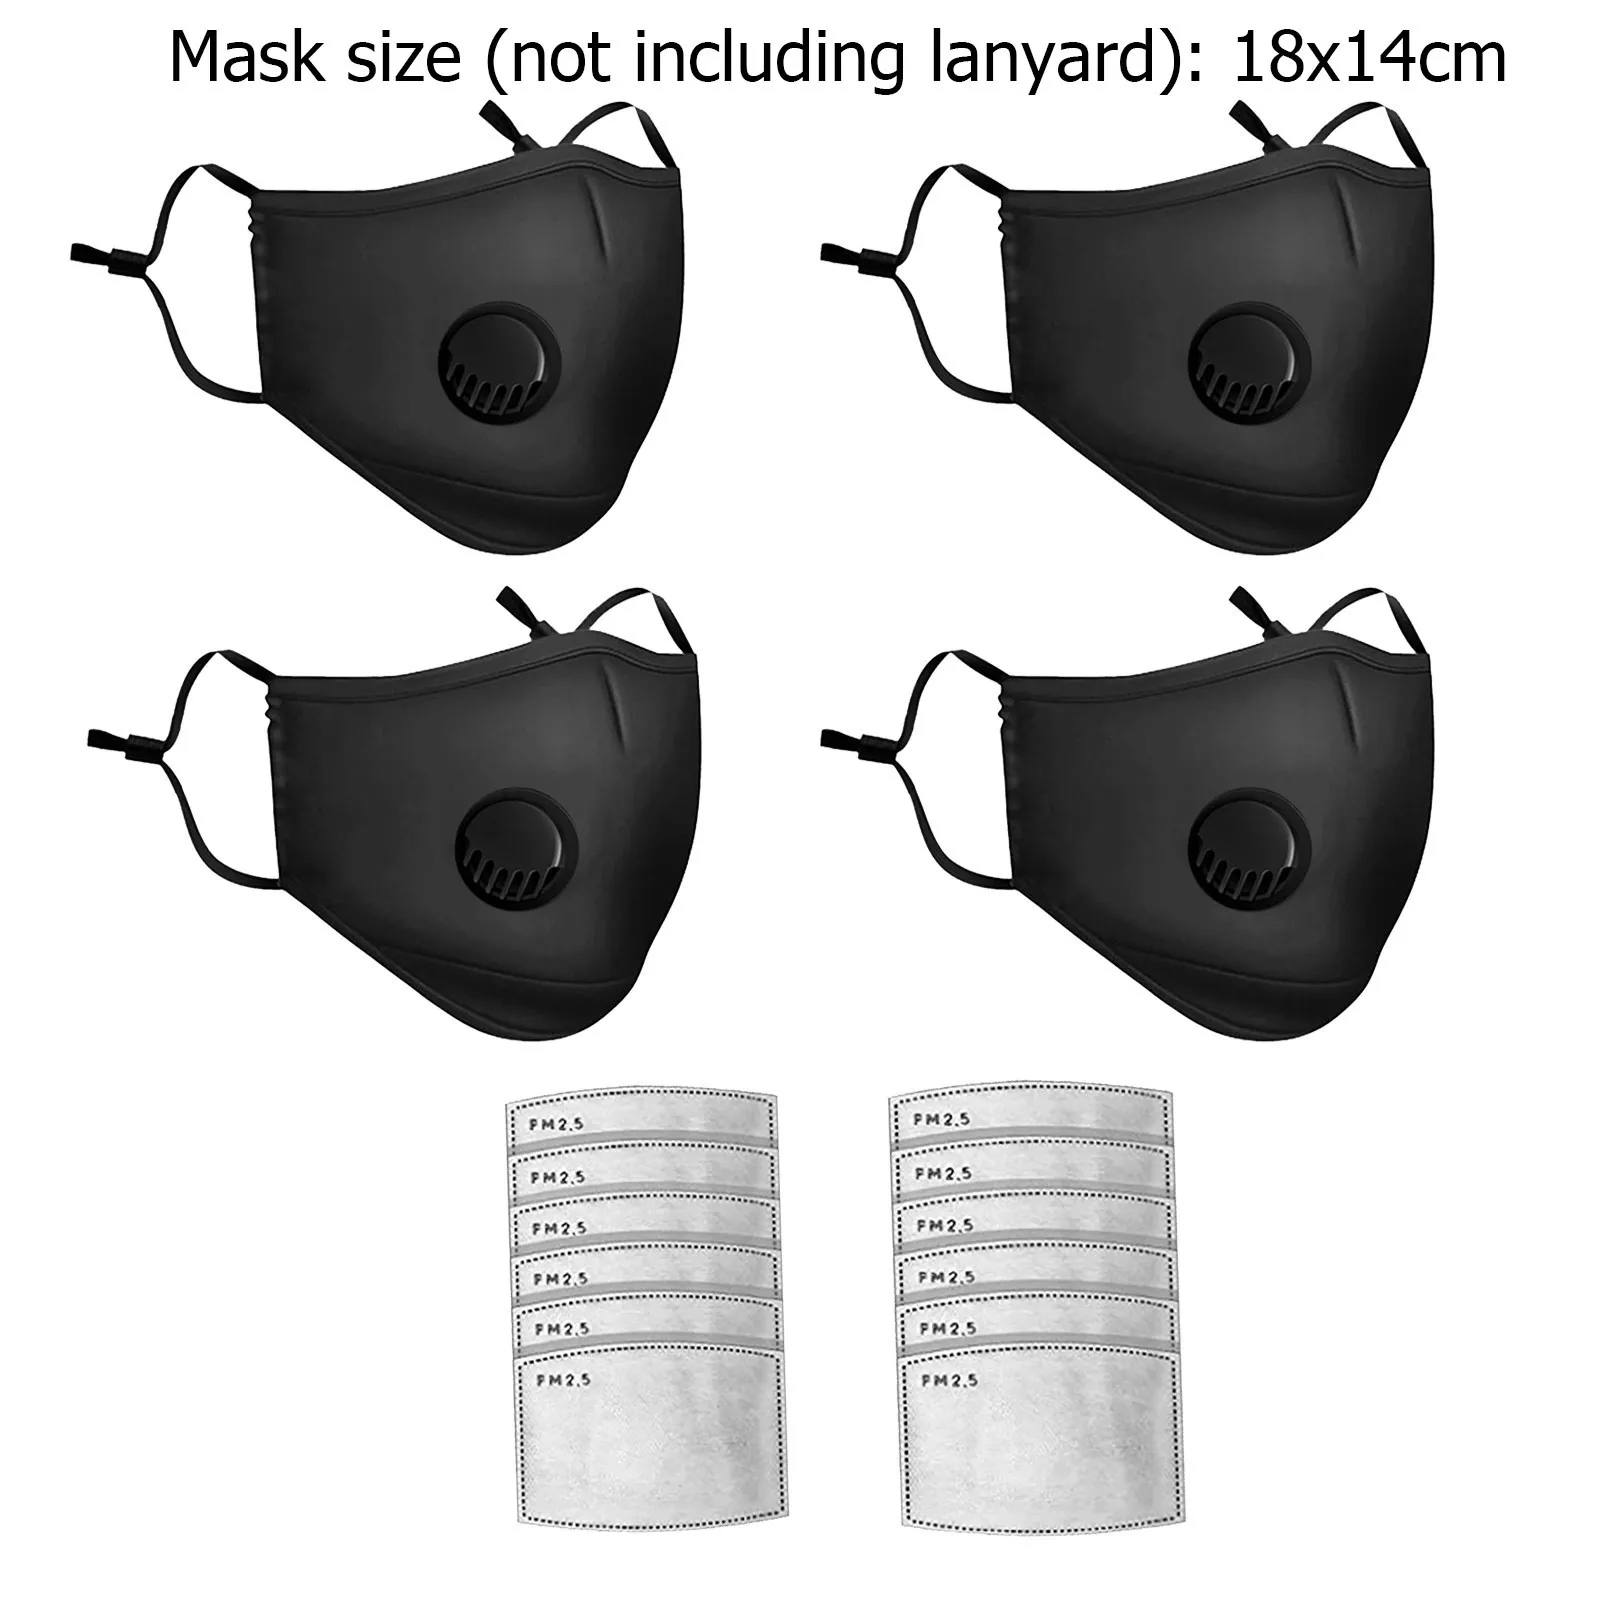 

4PC Outdoor Cycling Breathing Valve Mask Reusable Dustproof PM2.5 Windproof Anti[-Foggy Haze Pollution Riding Warm With Filter